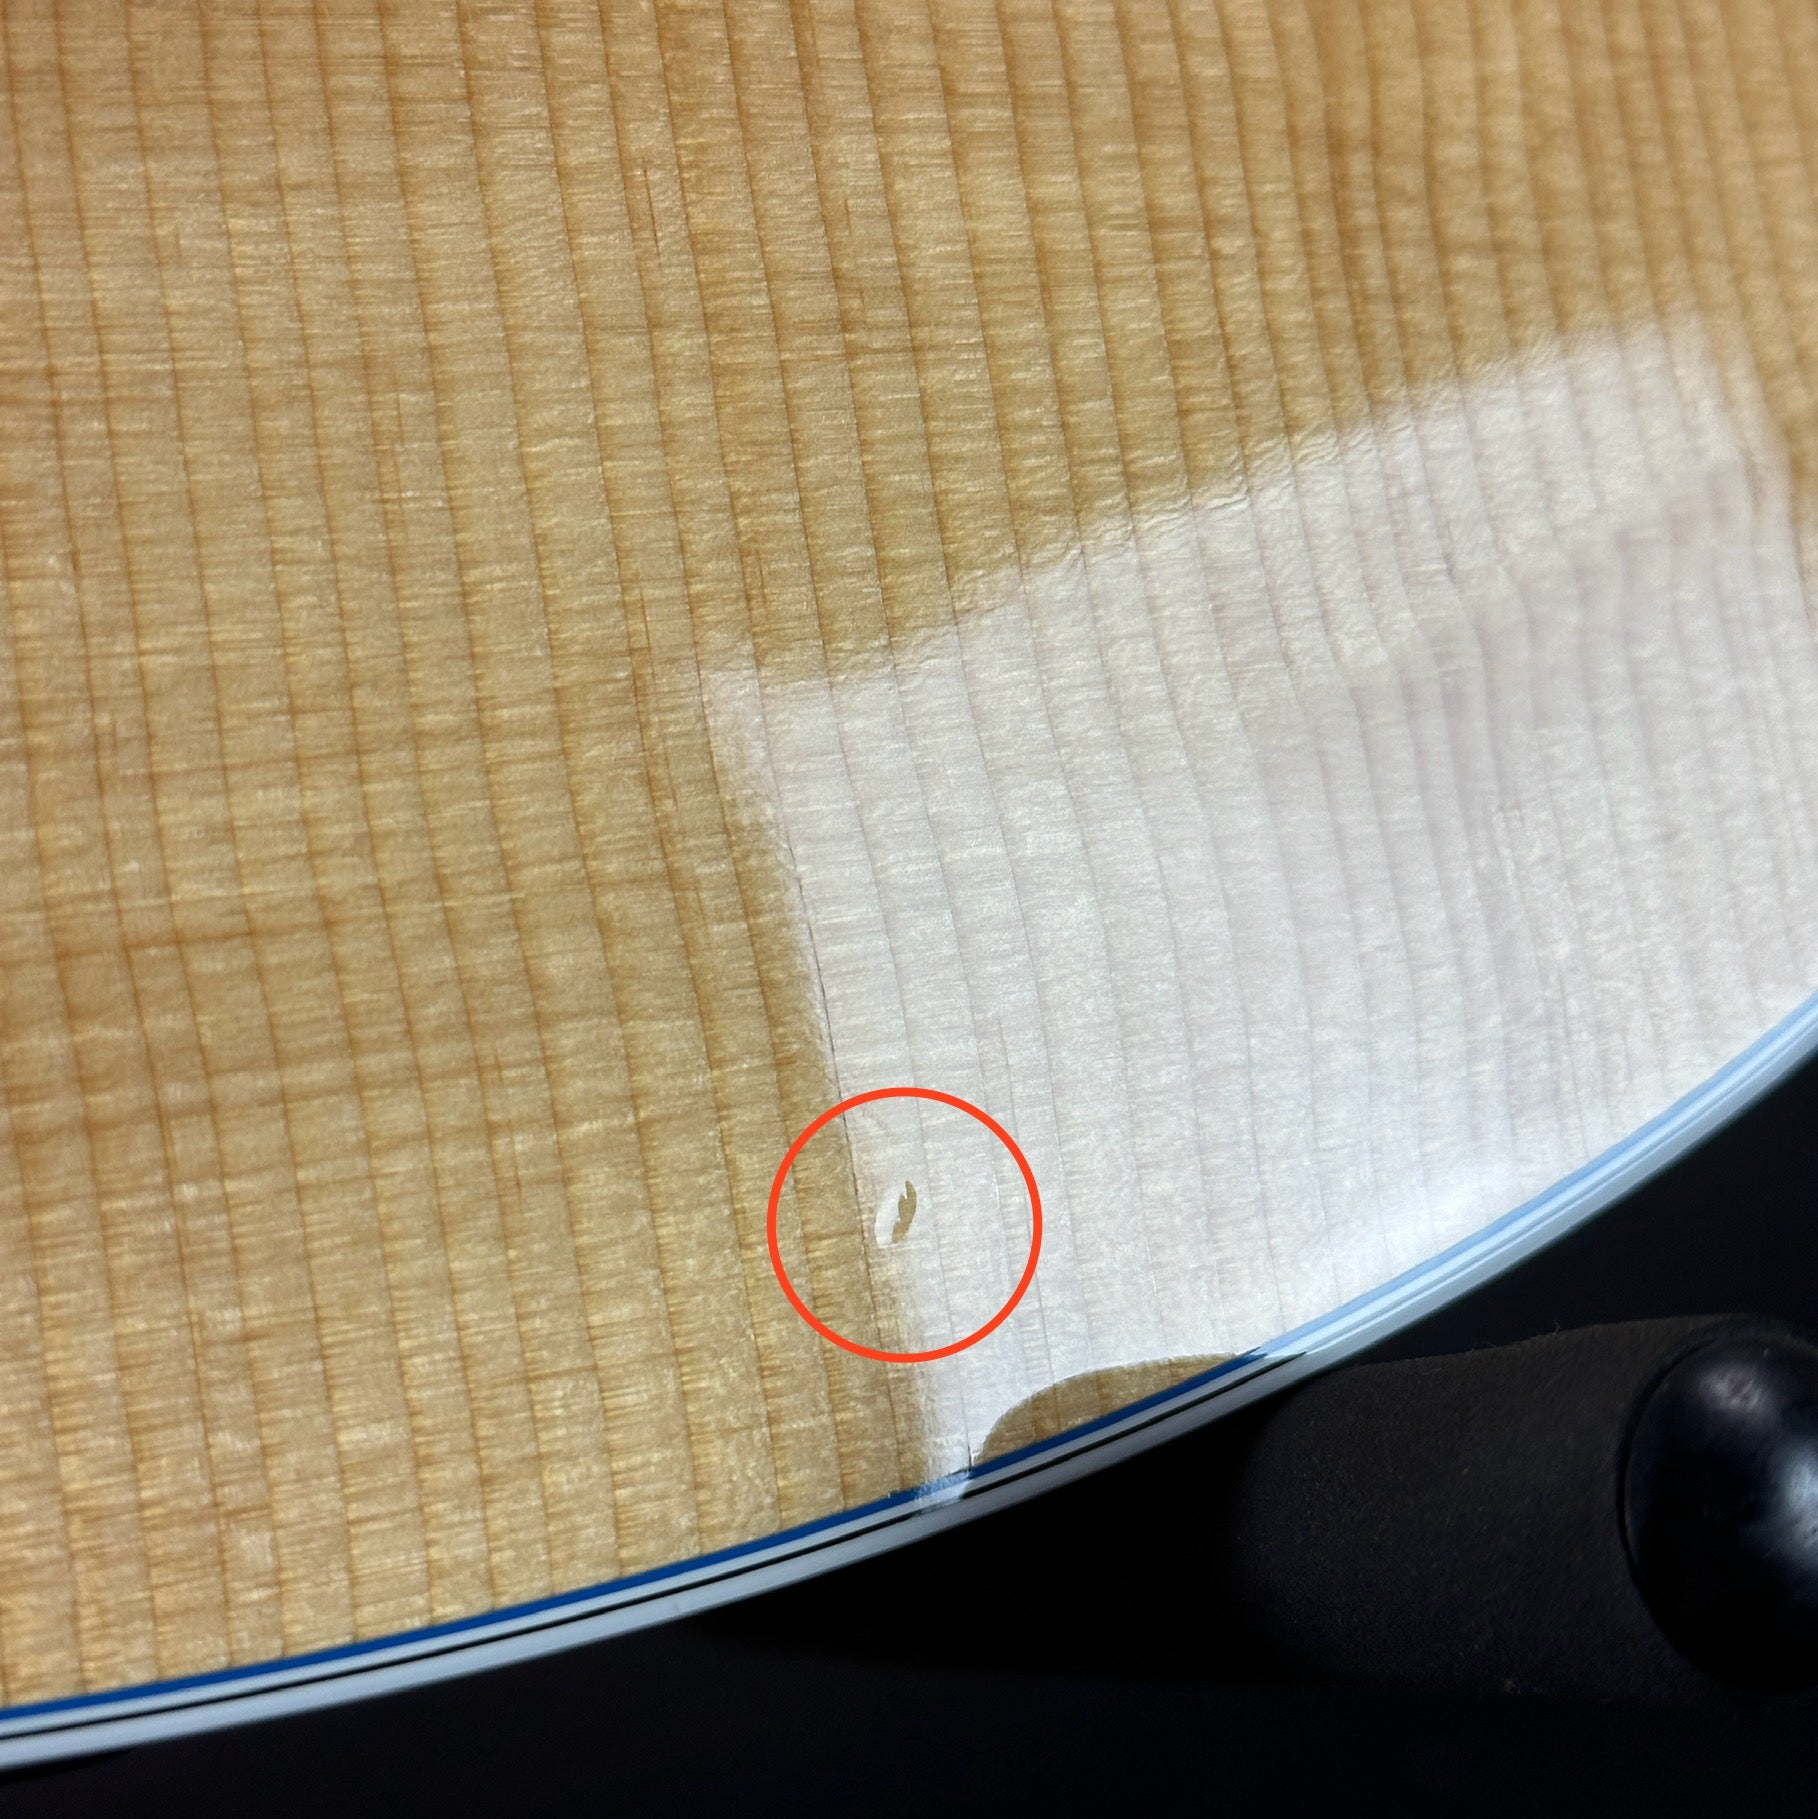 Small ding on body of Used Martin SC-13e.